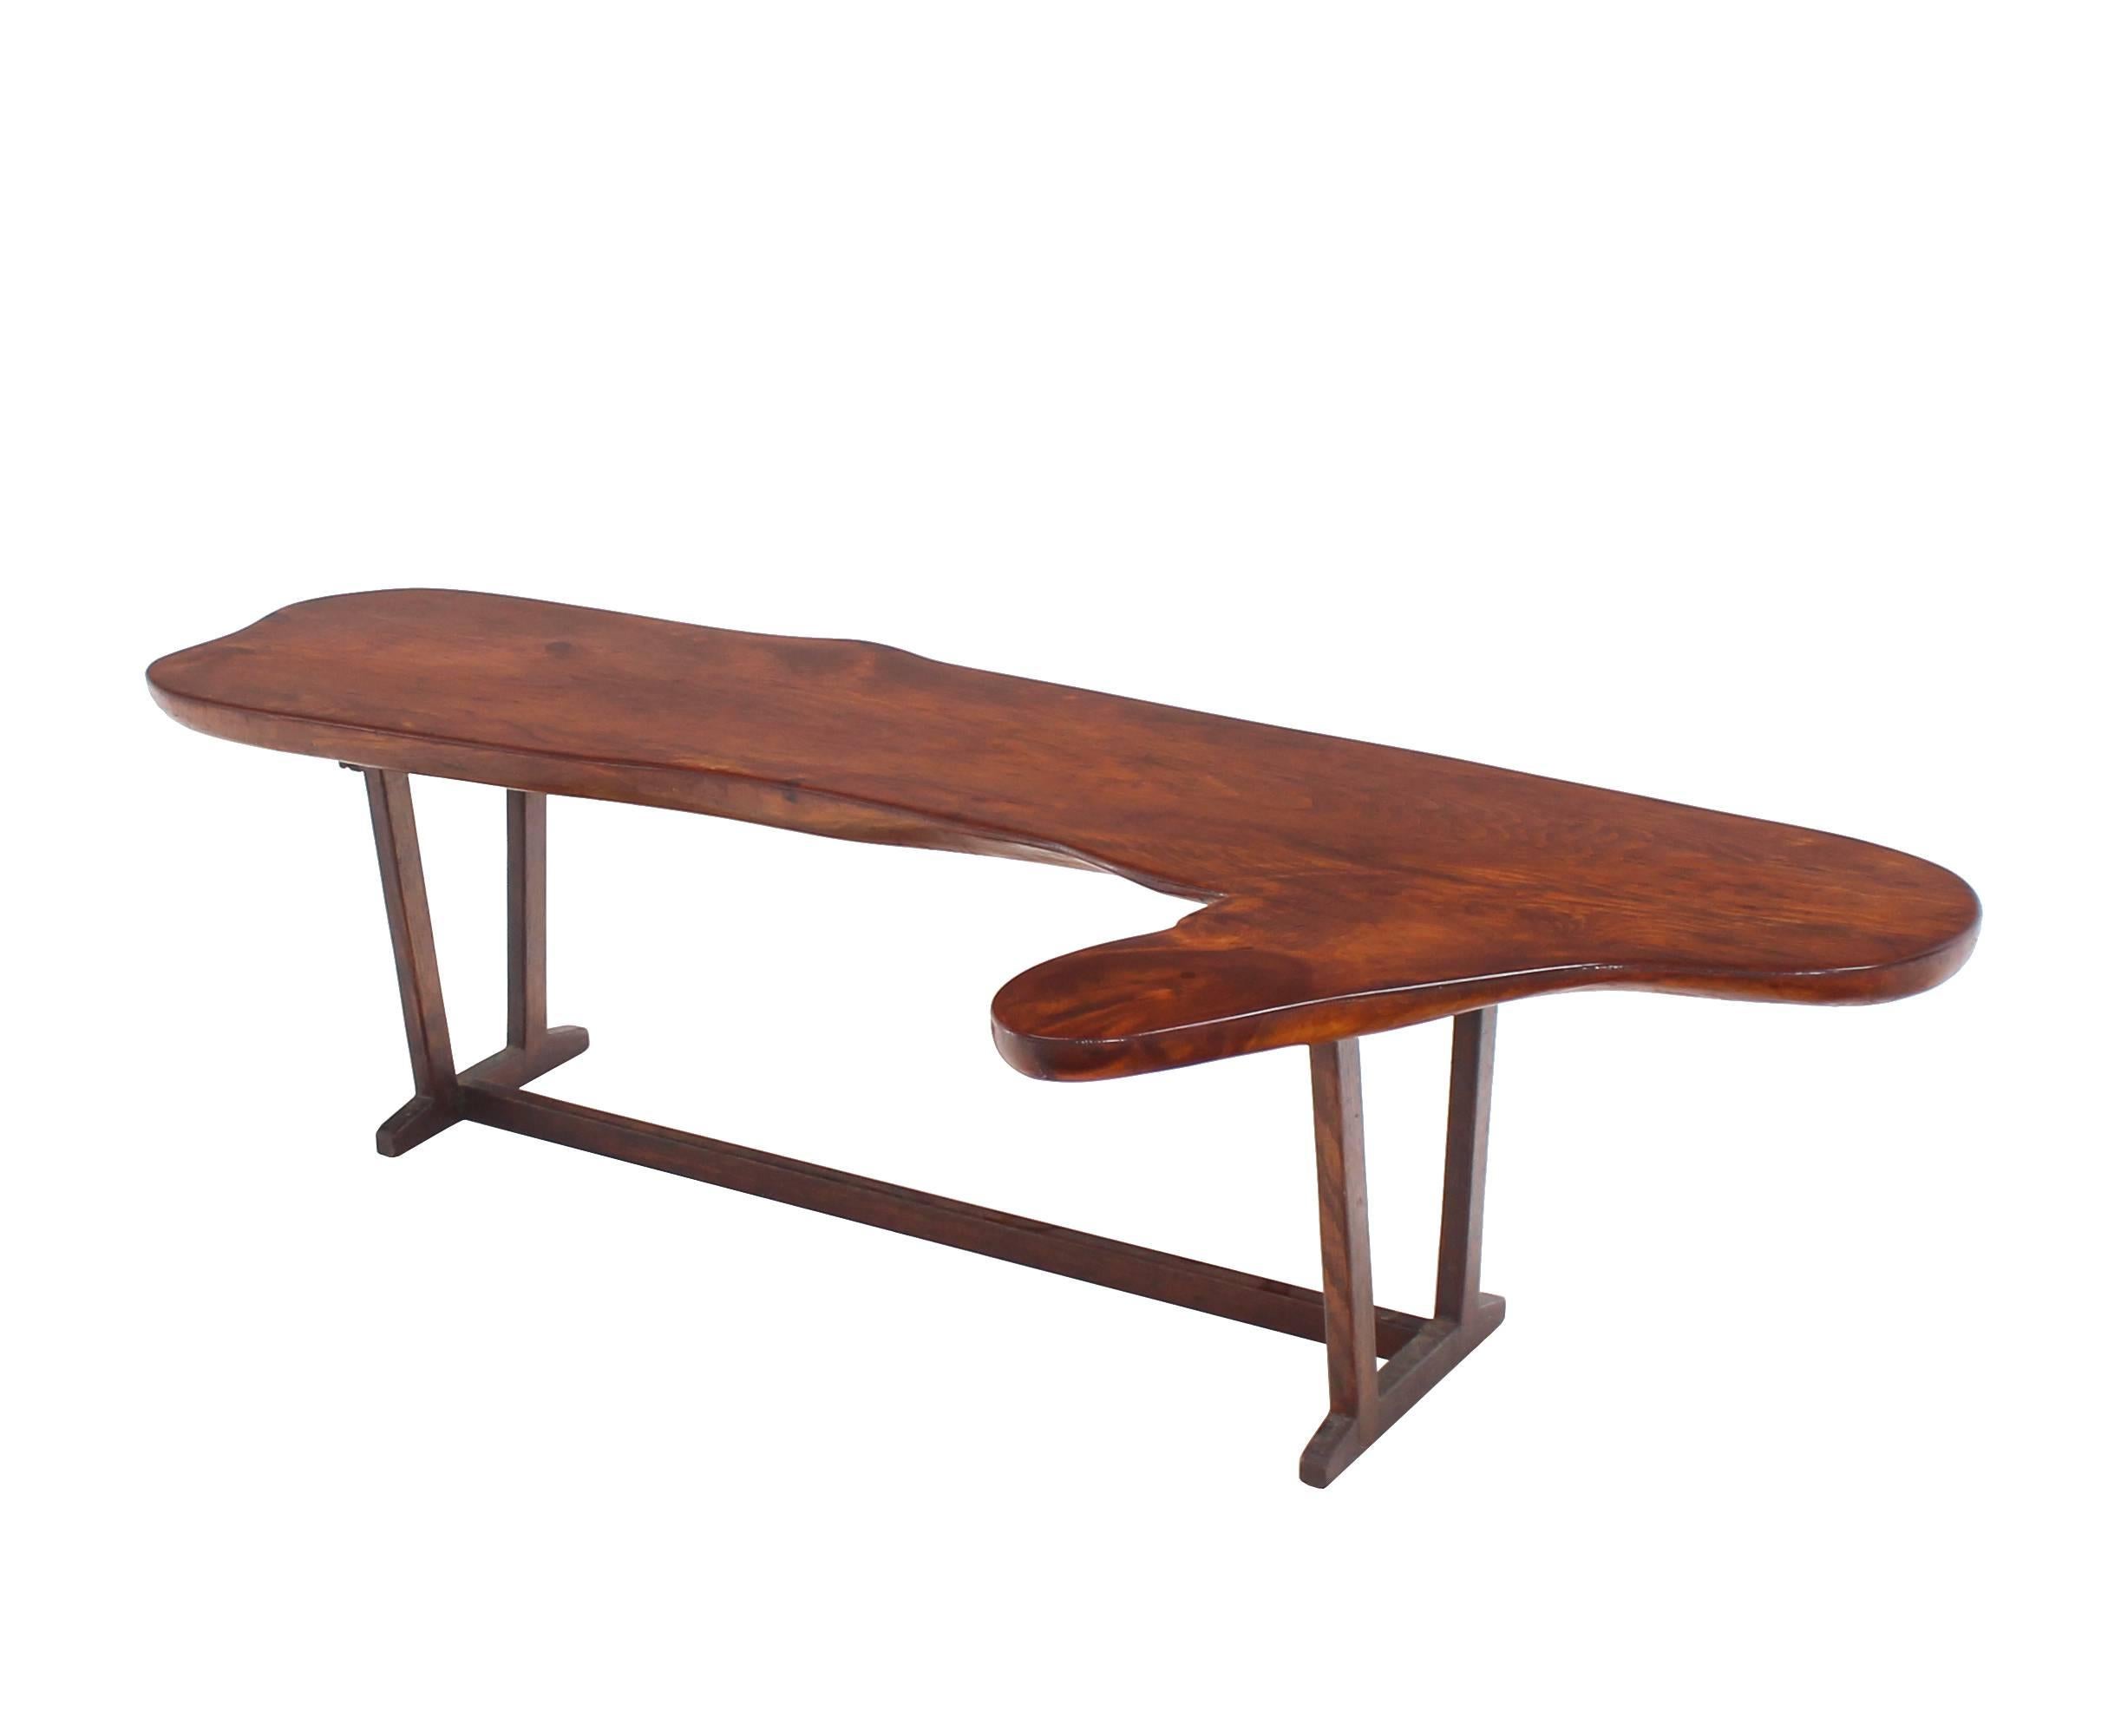 Very nicely built organic shape coffee table or bench. Nice thick solid wood top.